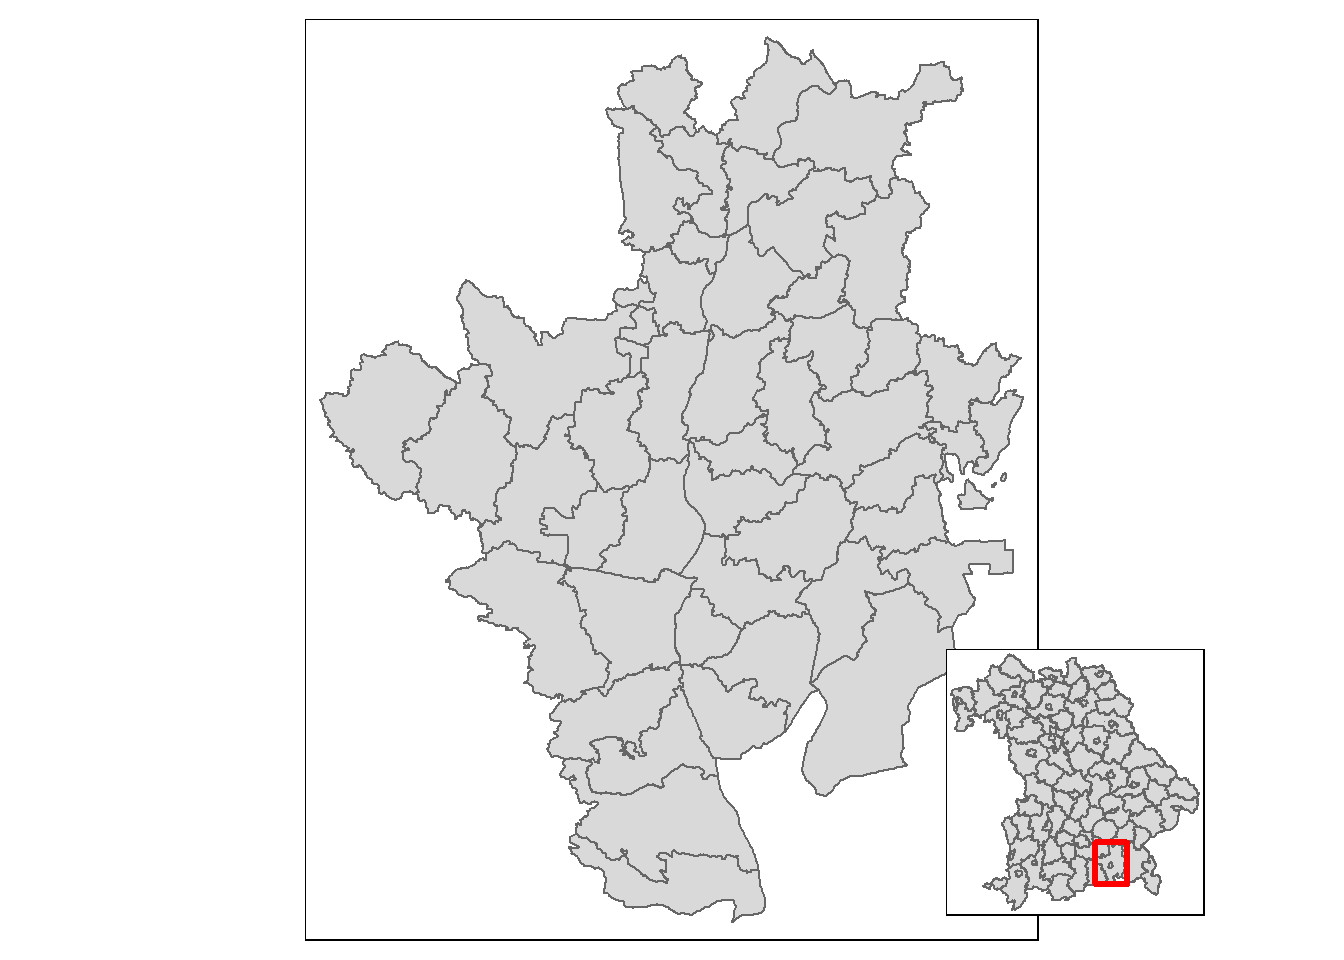 Towns and communities of the district of Rosenheim